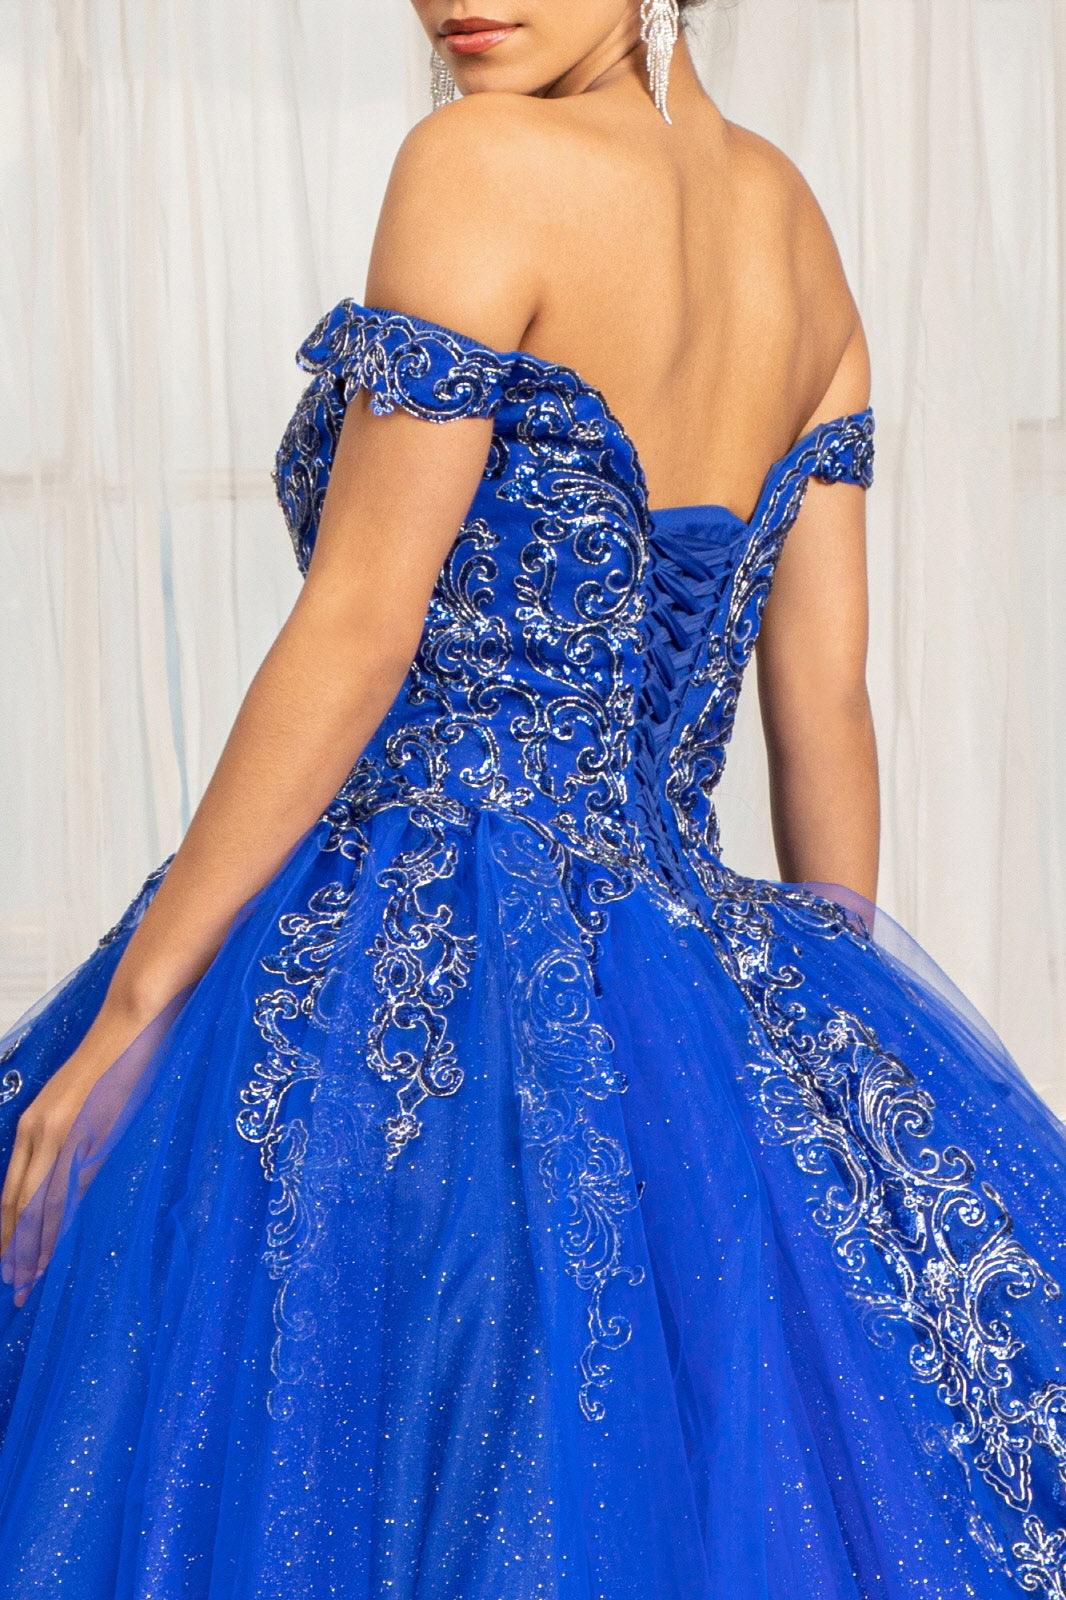 Off Shoulder Quinceanera Dresses Ball Gown